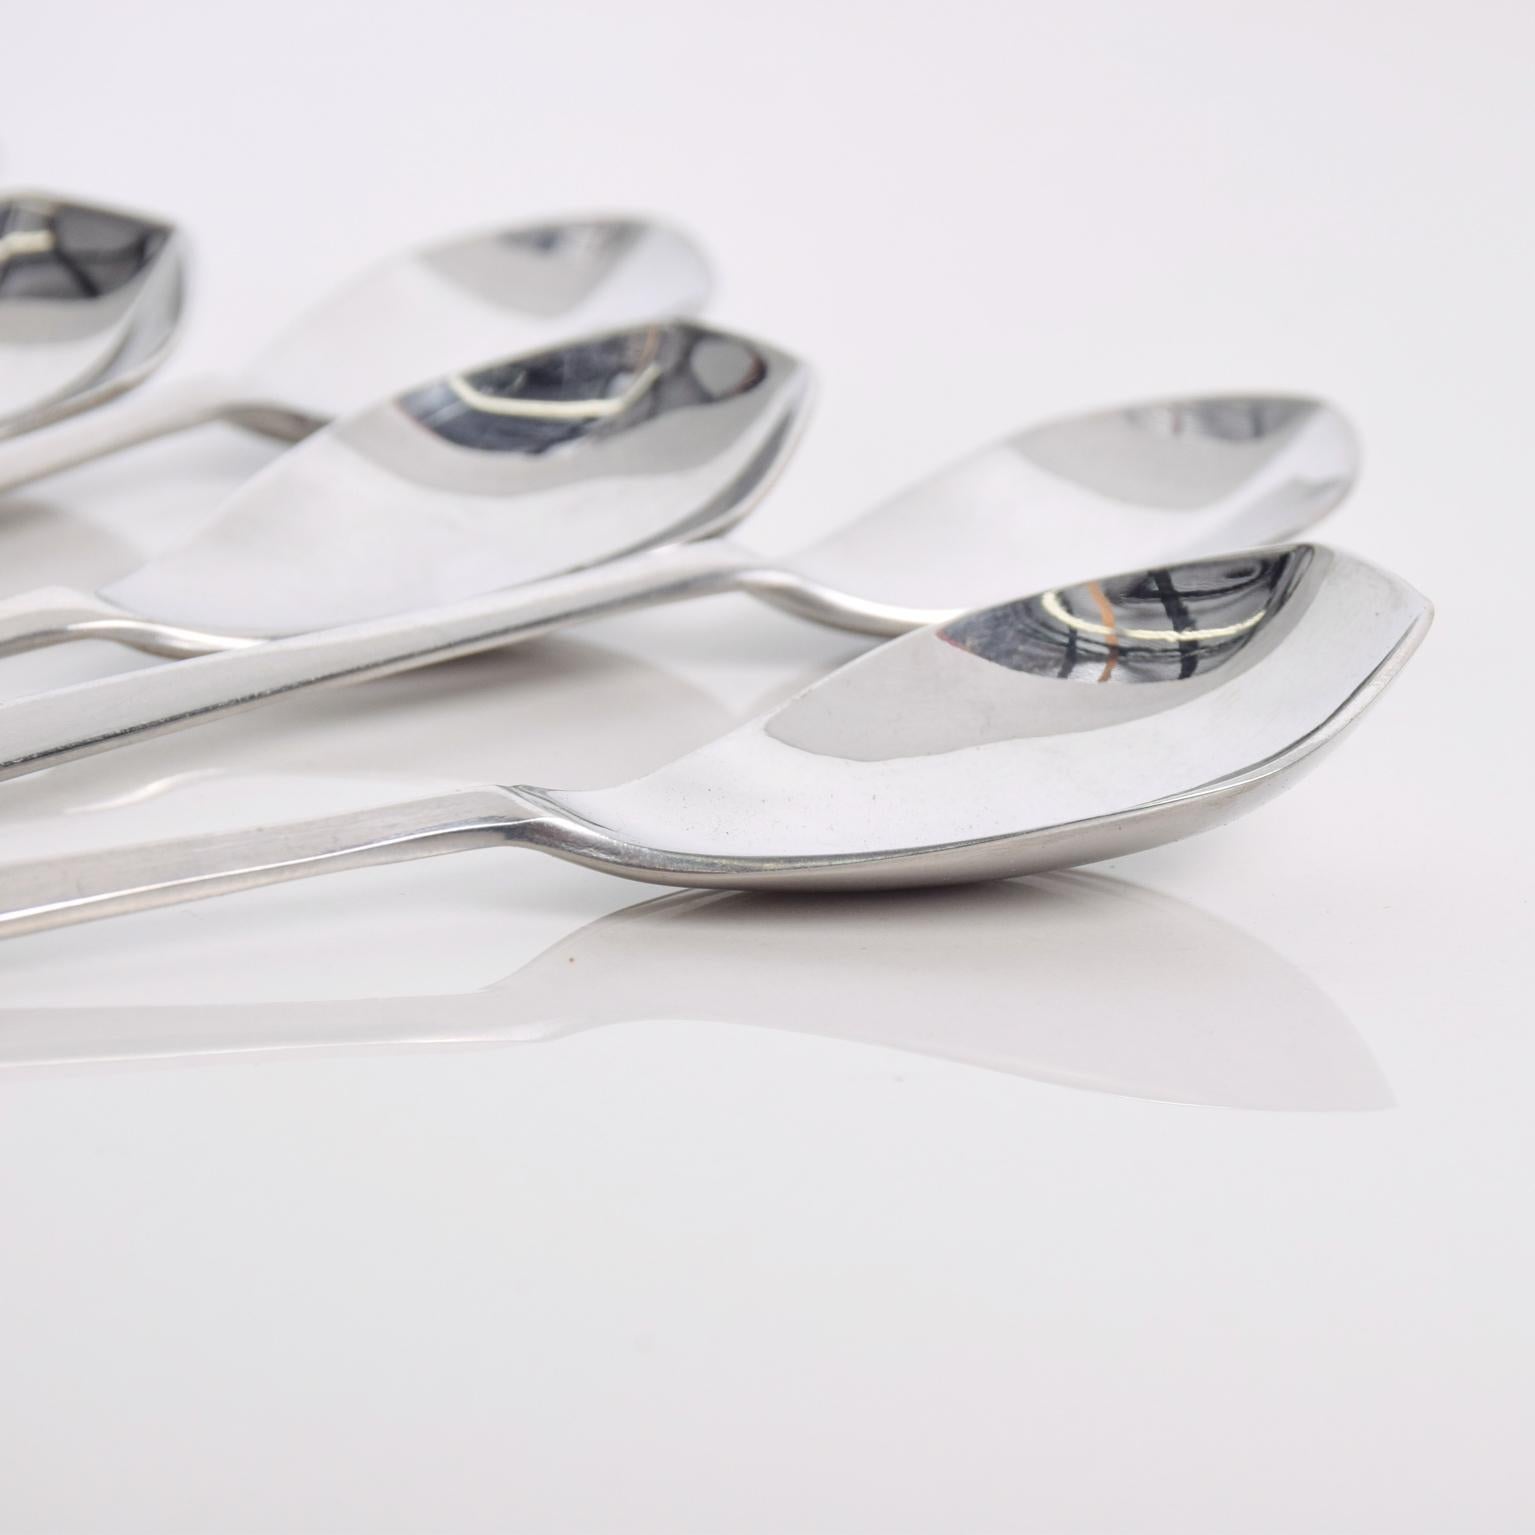 We are pleased to offer for your consideration, a set of four long spoons manufactured by Reed & Barton, Design by Gio Ponti.
Ref# ACC012020202 Stamped on the back of the spoon. 
Beautiful diamond shape. Gently used.
Dimensions:  1/2